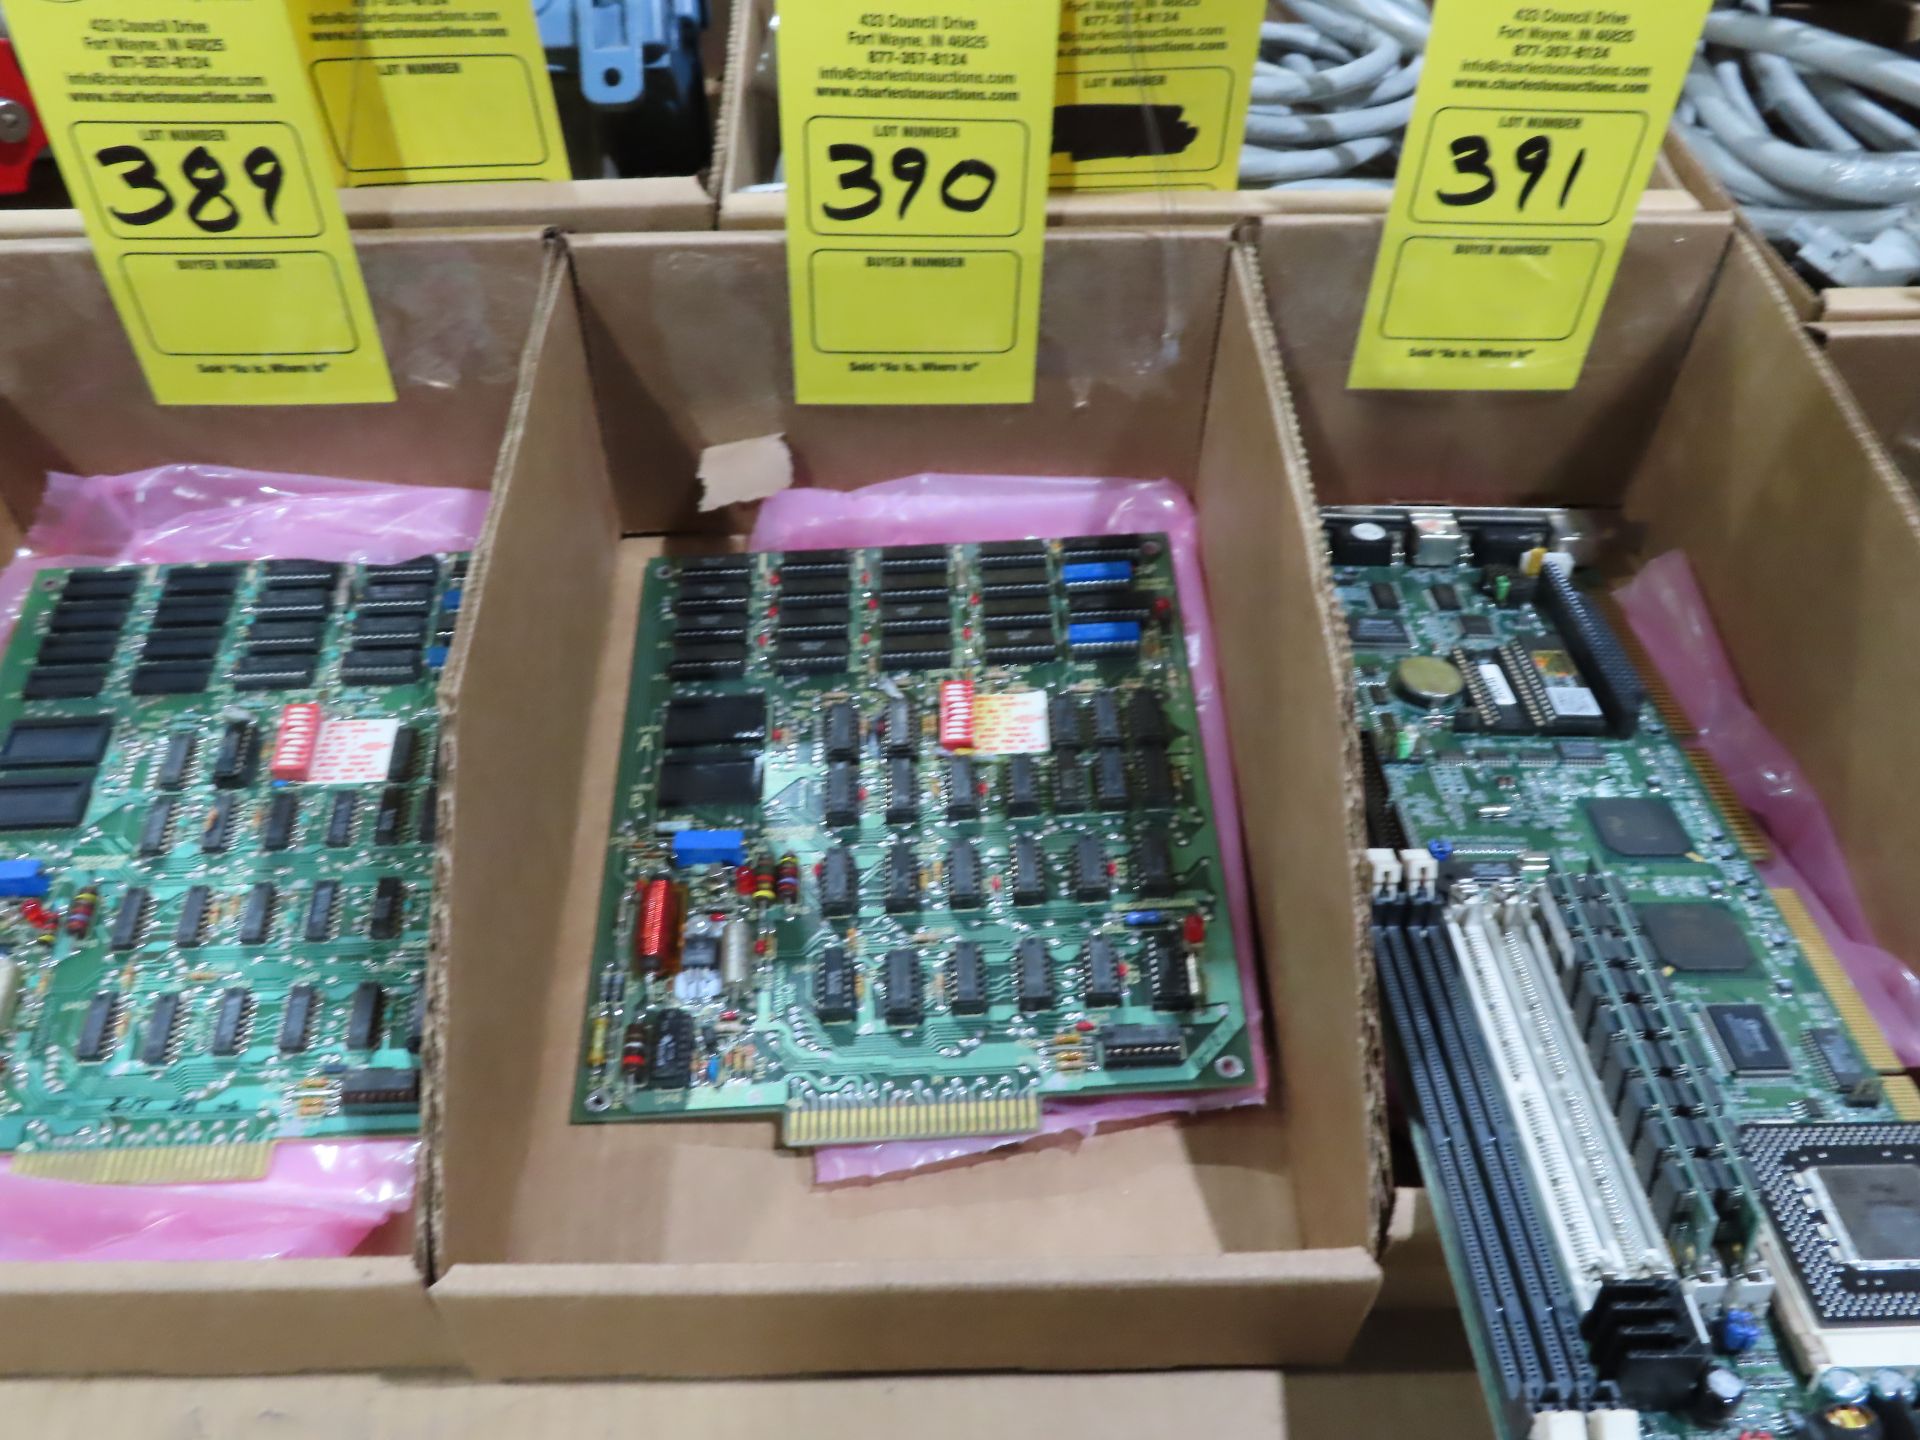 Texas Instruments 2459003-1 memory assembly board, as always, with Brolyn LLC auctions, all lots can